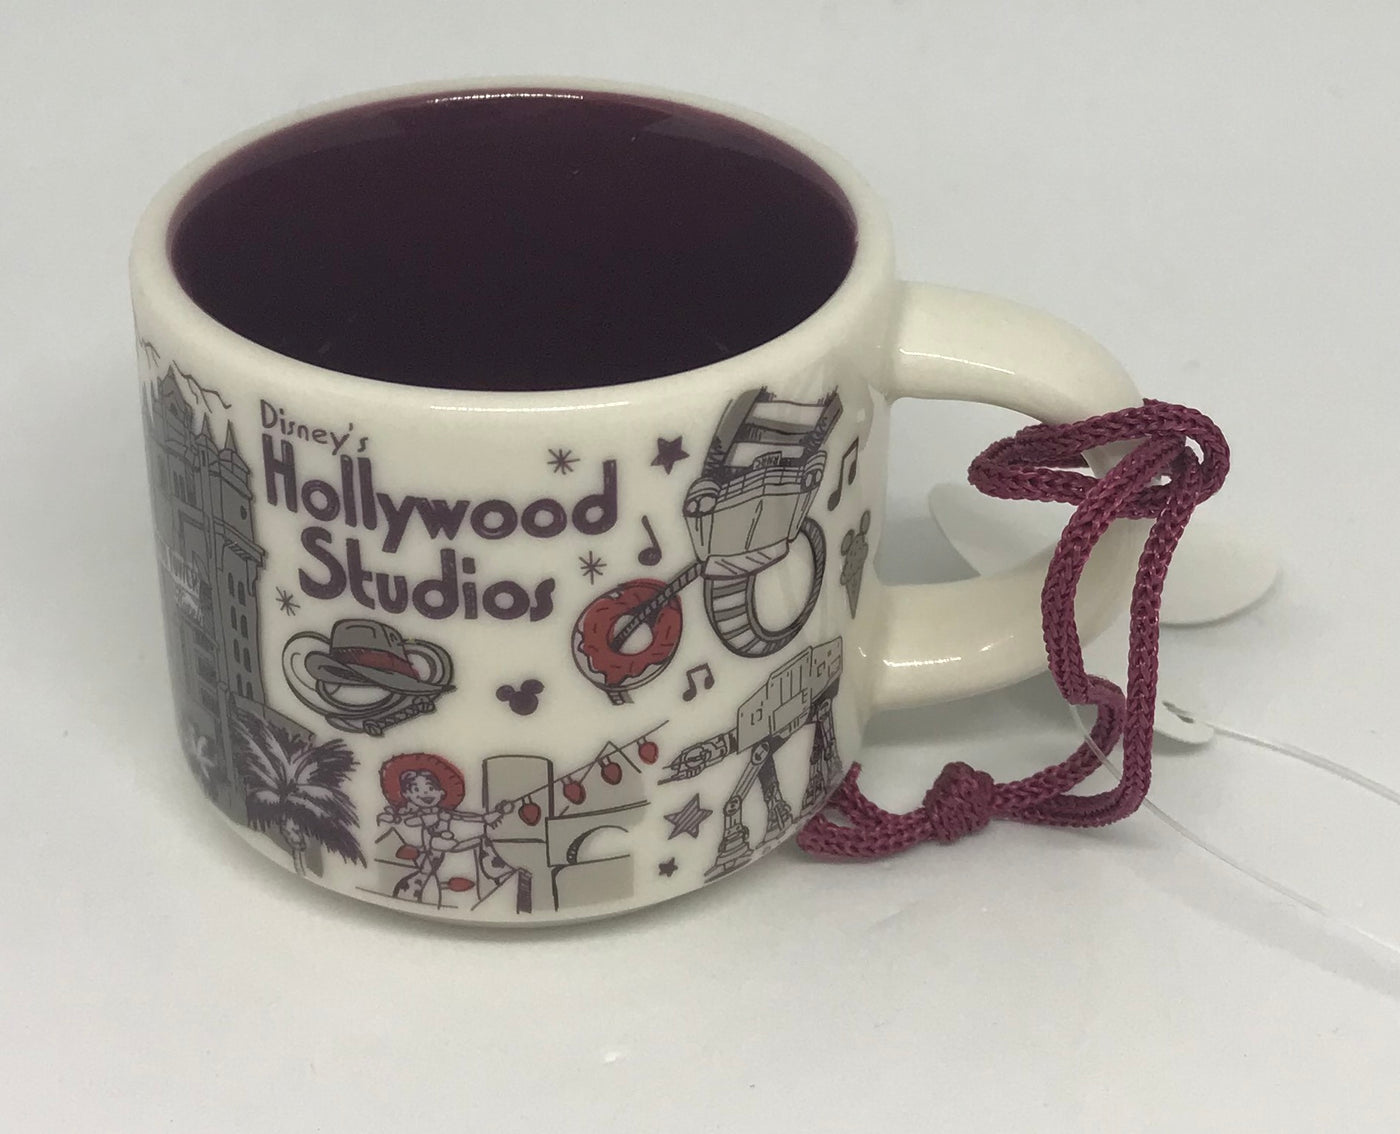 Disney Parks Starbucks Been There Hollywood Studios Coffee Mug Ornament New